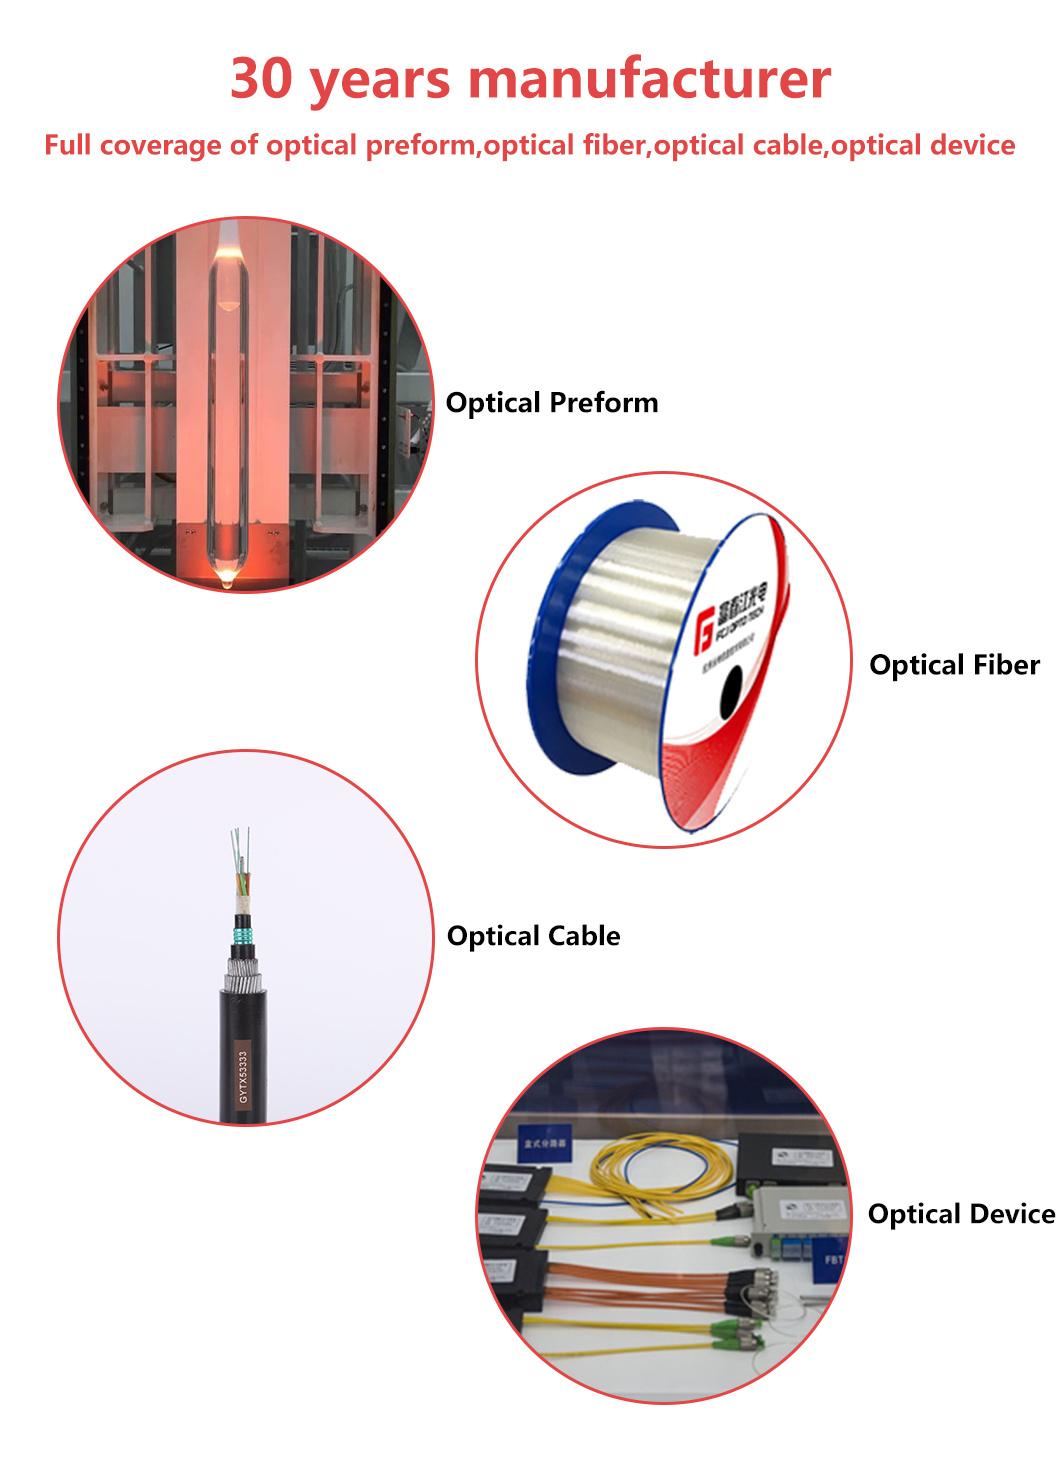 Outdoor, Metallic Strength Member with Central Tube and The Parallel Wire Steel-PE Flame-Retardant Fiber Optic Cable Gyxtzw